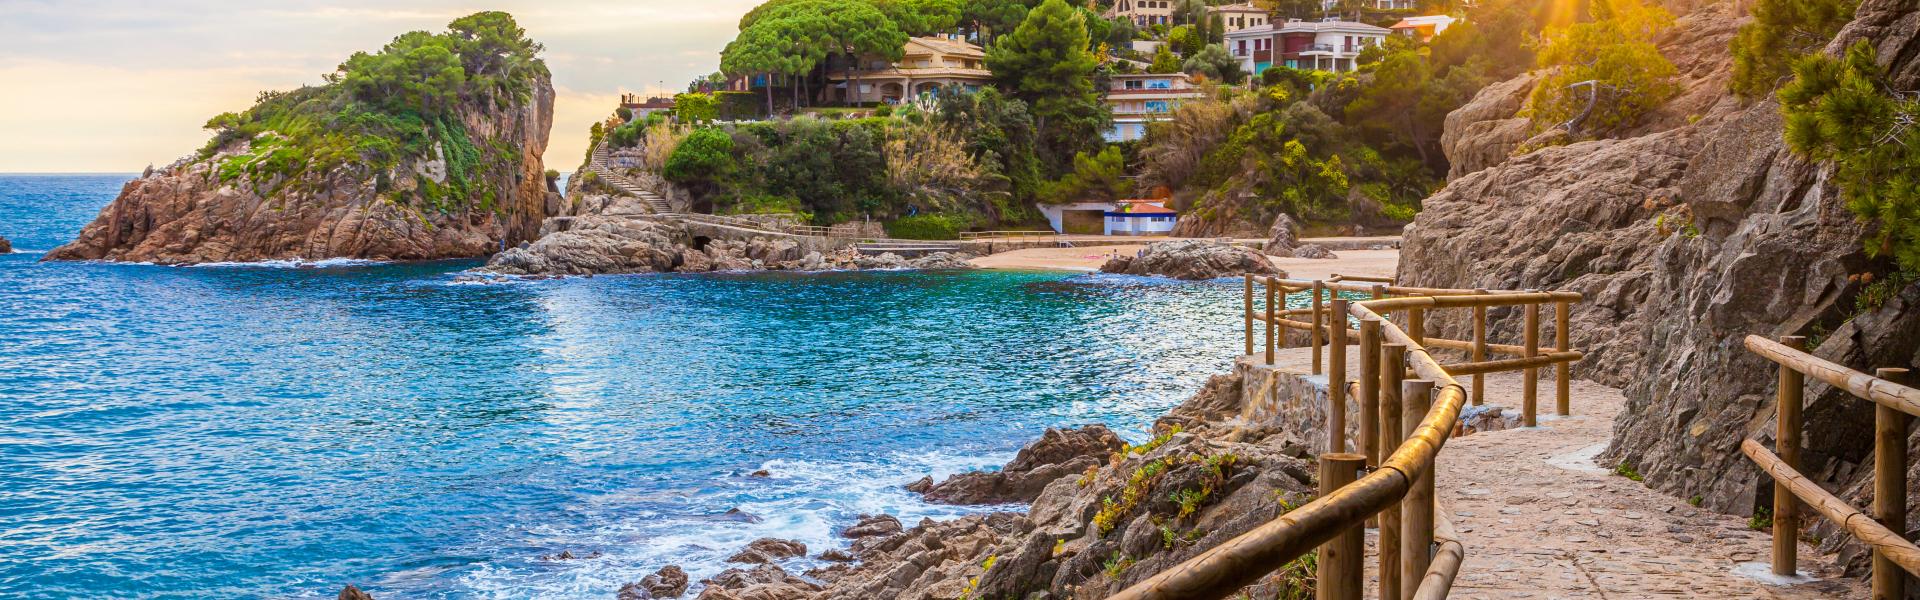 What to do on the Costa Brava?